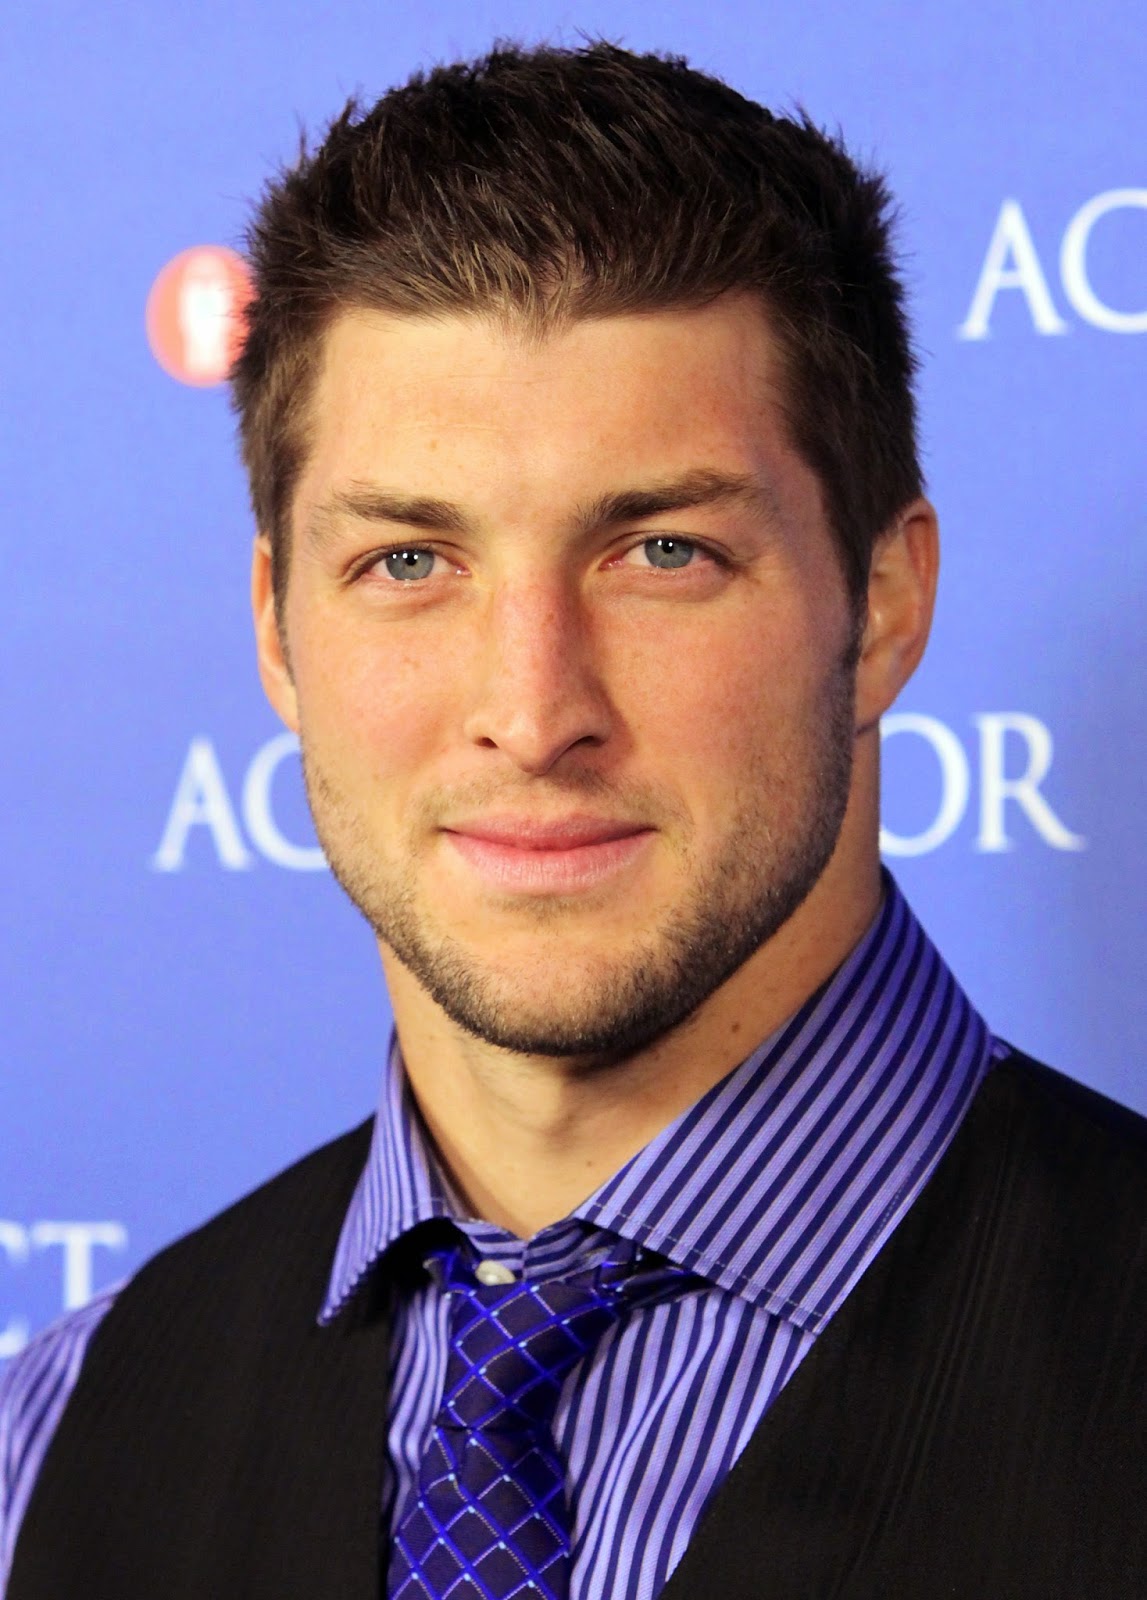 American Footballer Tim Tebow Biography, Photos and Profile | Sports